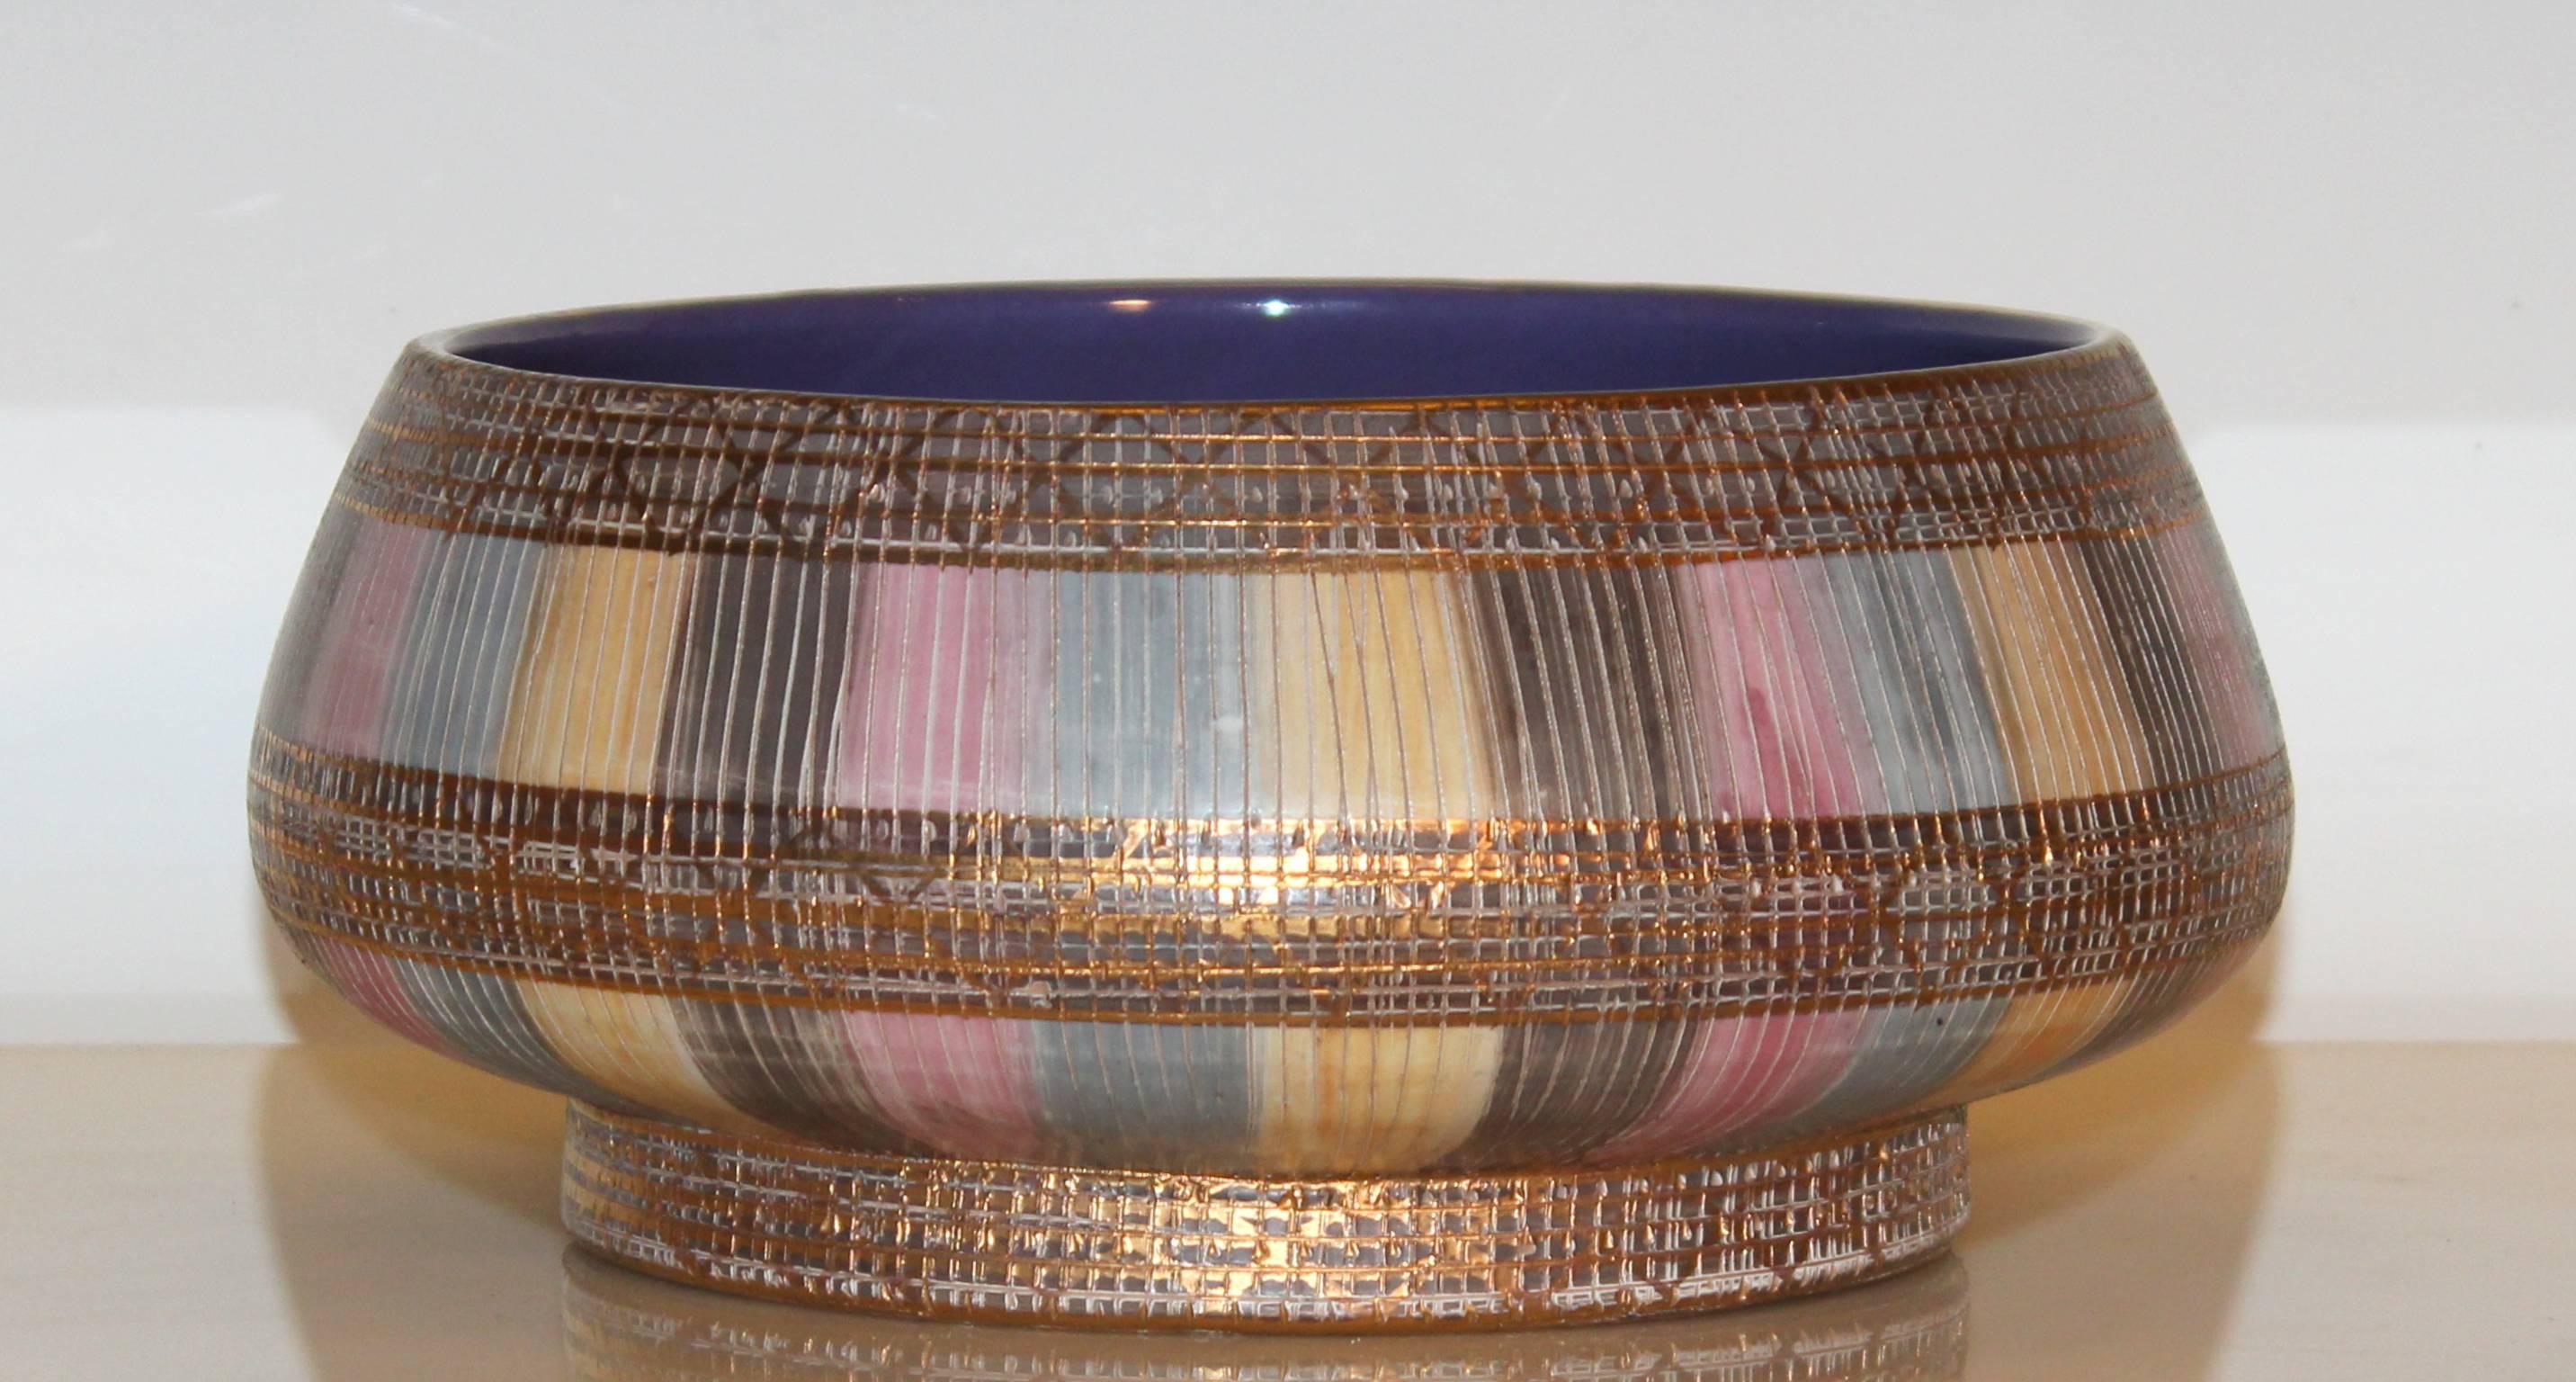 Vintage Bitossi Seta decor console or centrepiece bowl, circa 1950s-1960s. Finely incised decoration over pastel colors and with gilt highlights.Measures: 4 1/2" high, 10" diameter. Original paper export label. Excellent condition.